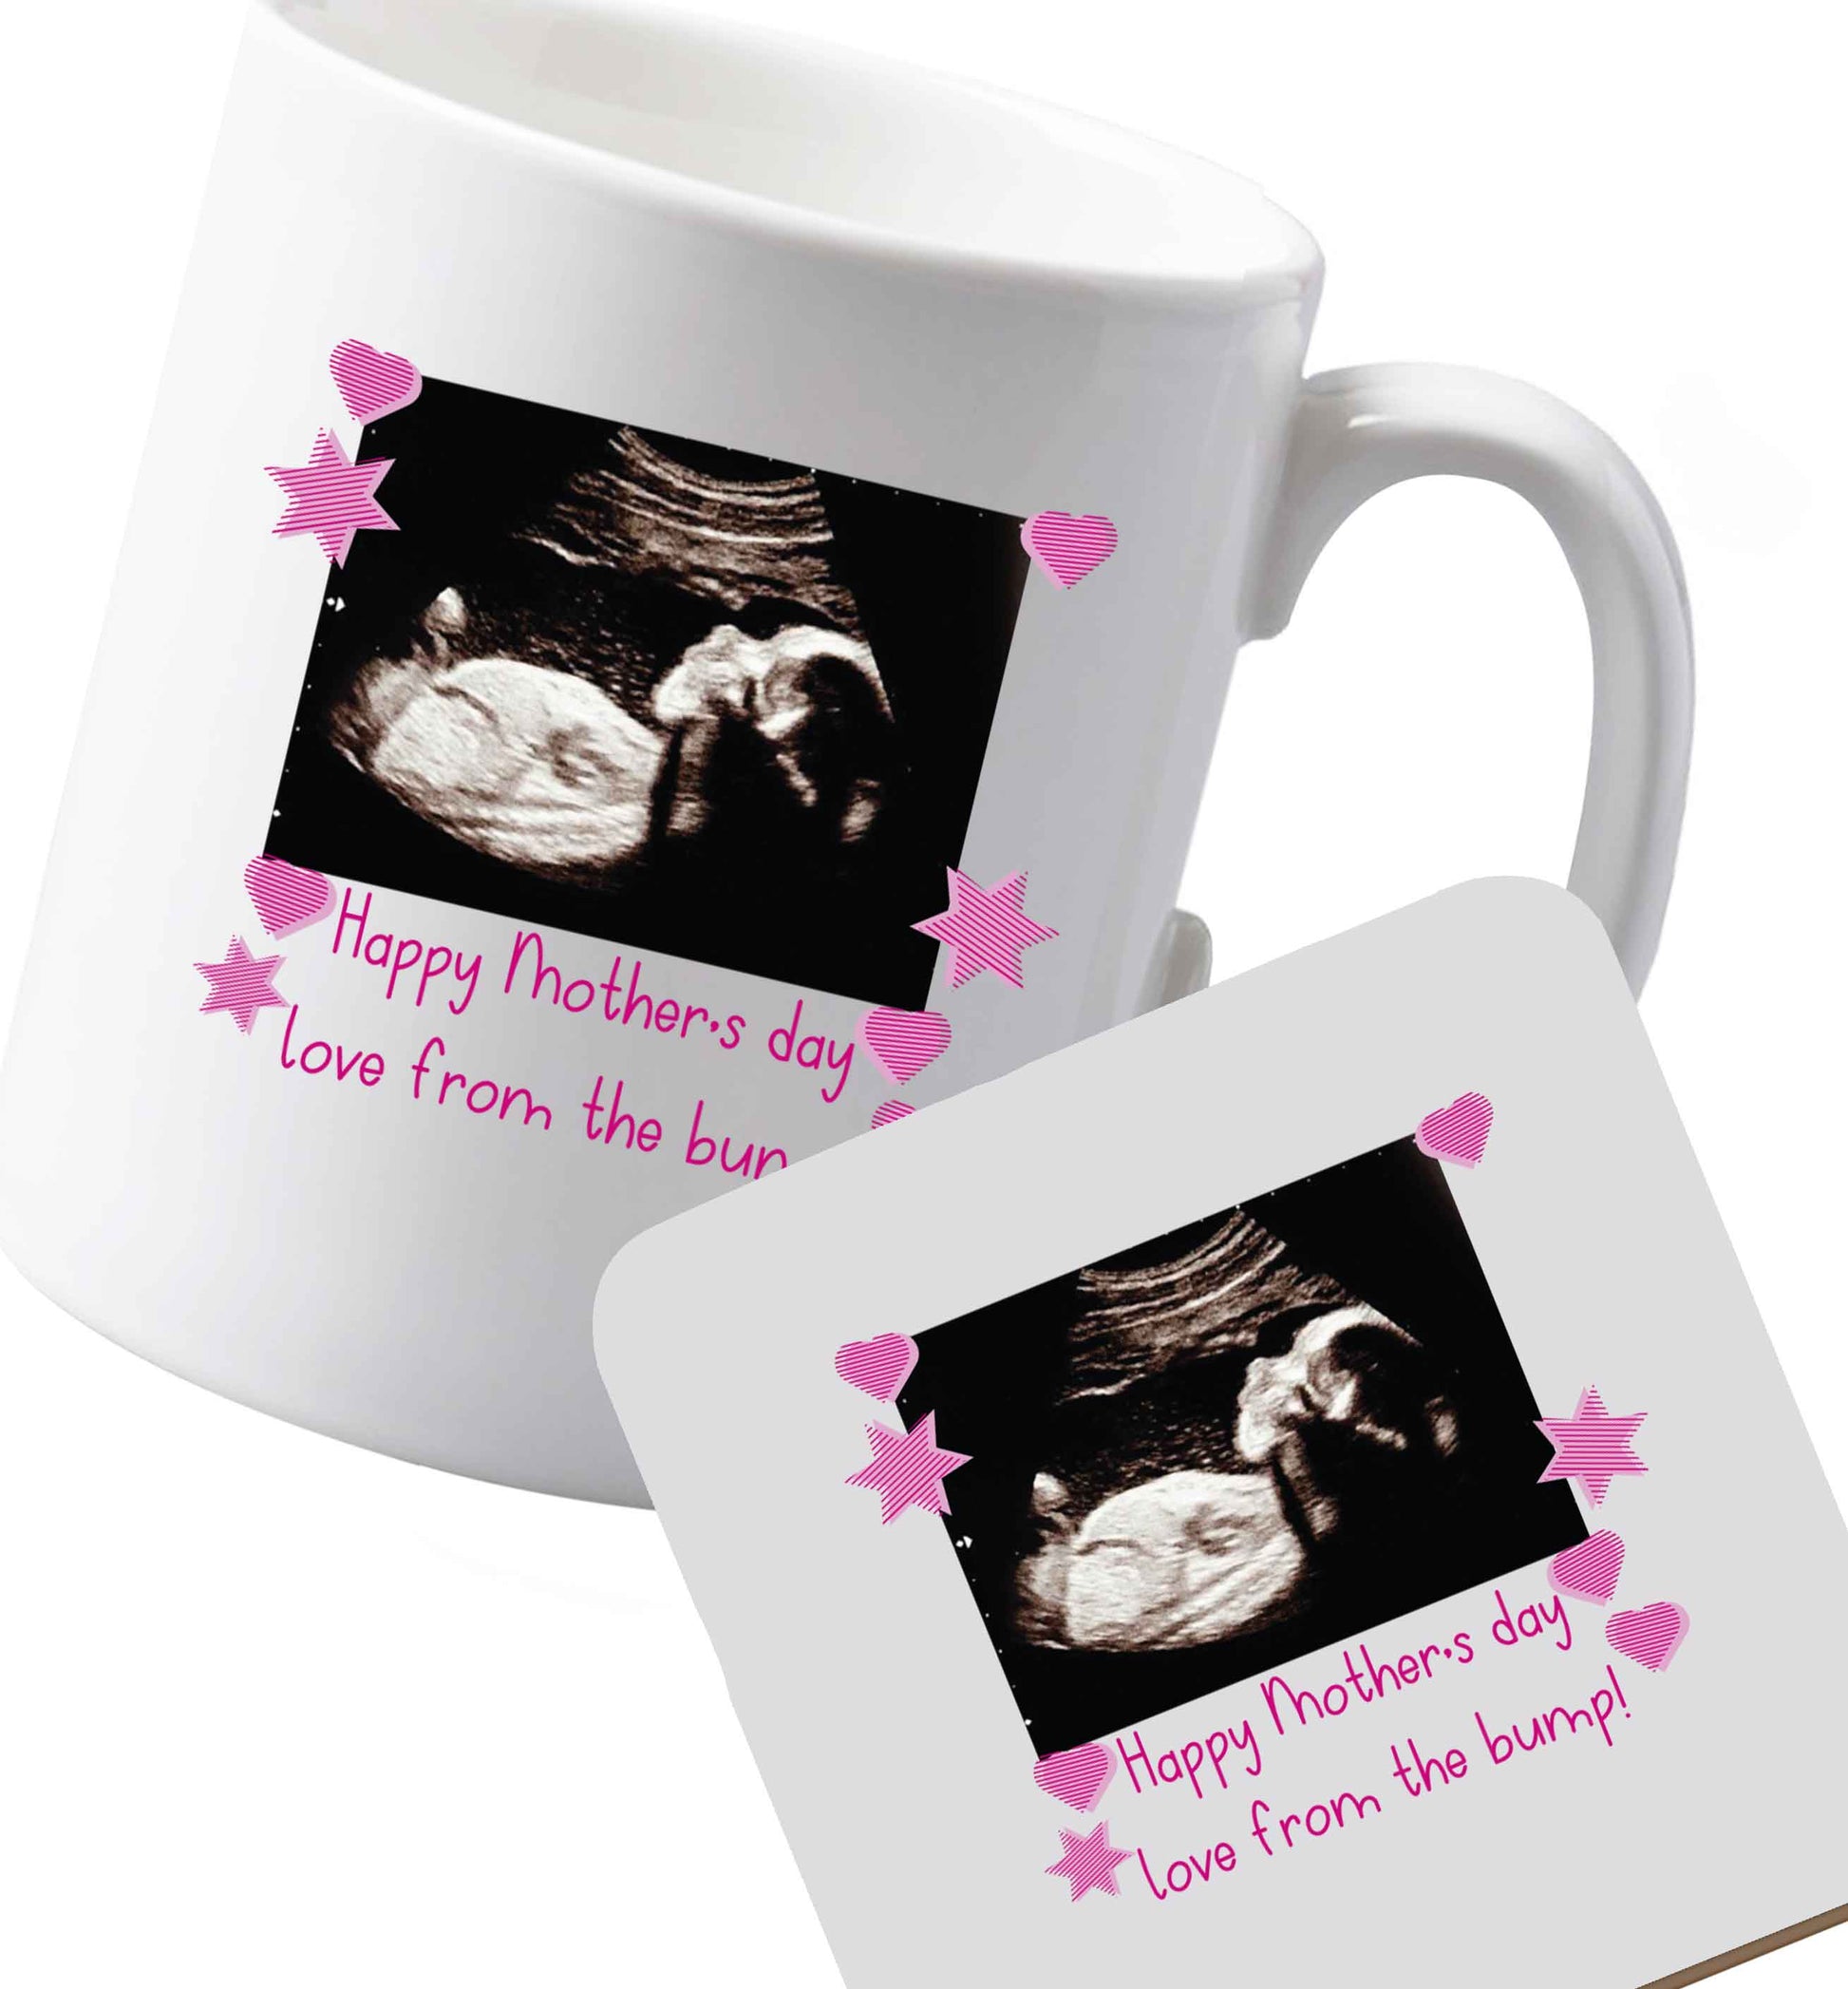 10 oz Ceramic mug and coaster Happy Mother's day love from the bump - pink  both sides